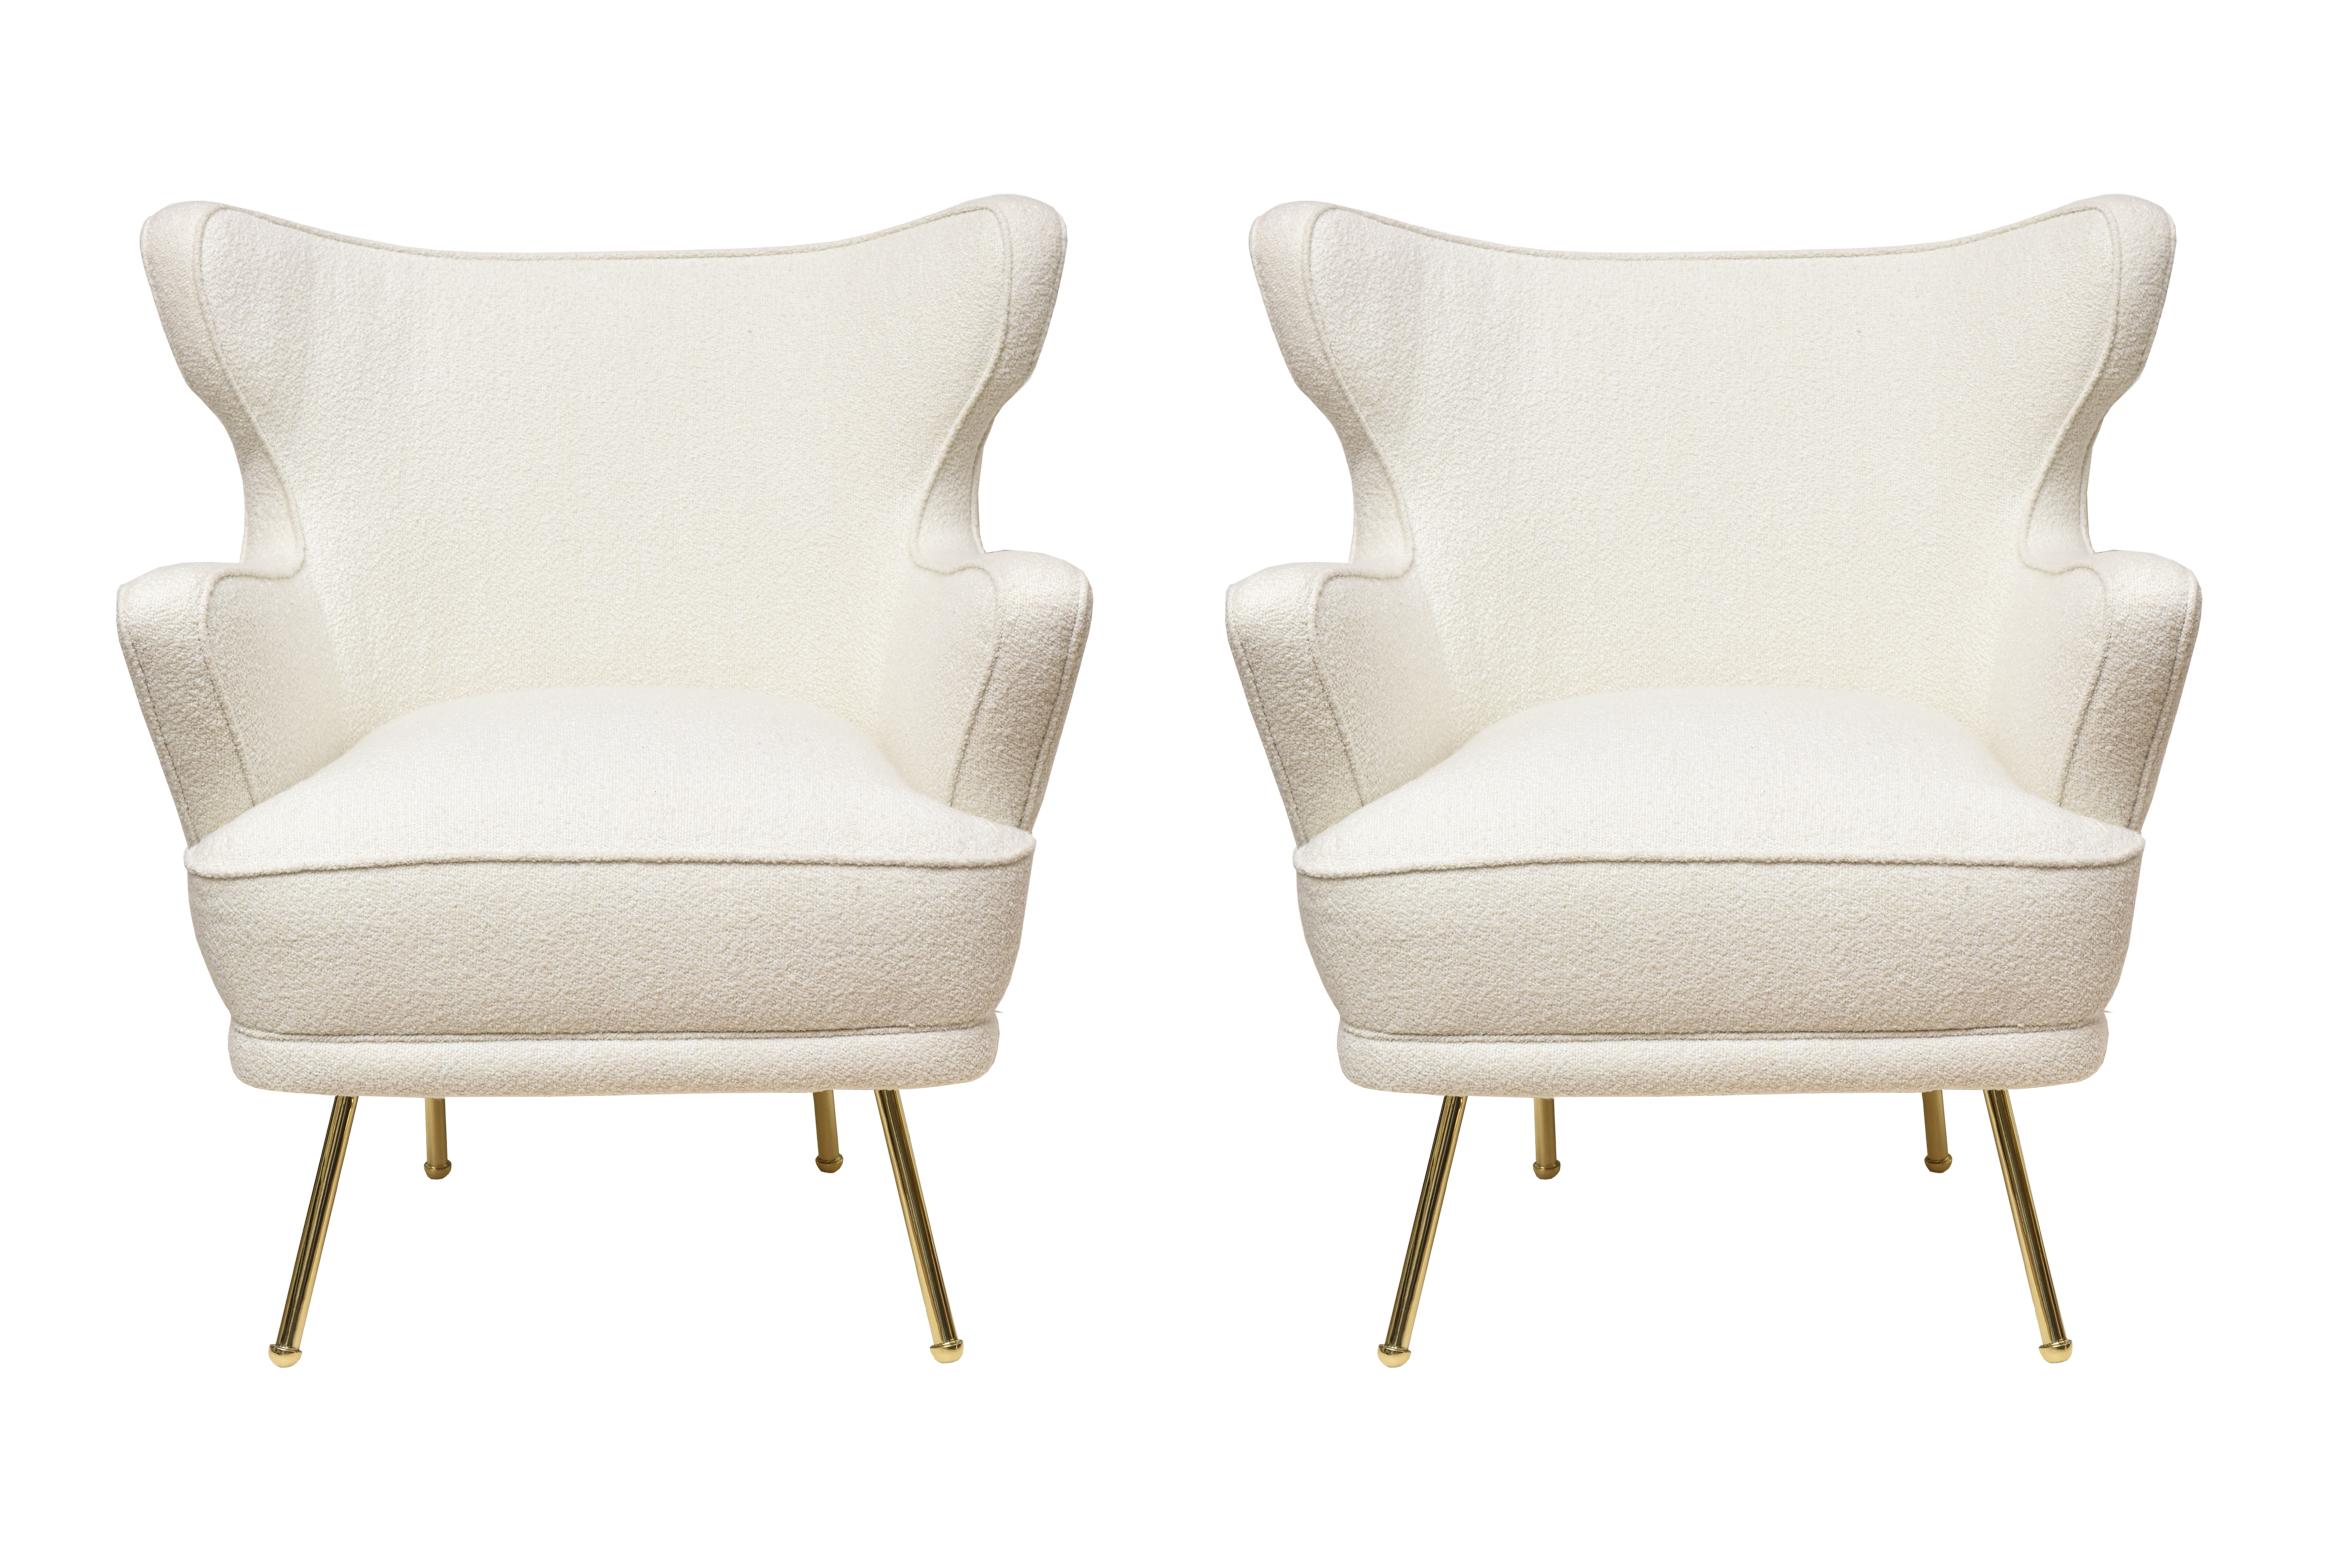 These beyond stunning vintage 1940's fully restored Italian side chairs are like mini Zanuso's with sculptural forms. Their original legs were now gloriously re brass plated. The new chic white boucle upholstery fabric and all new insides make for